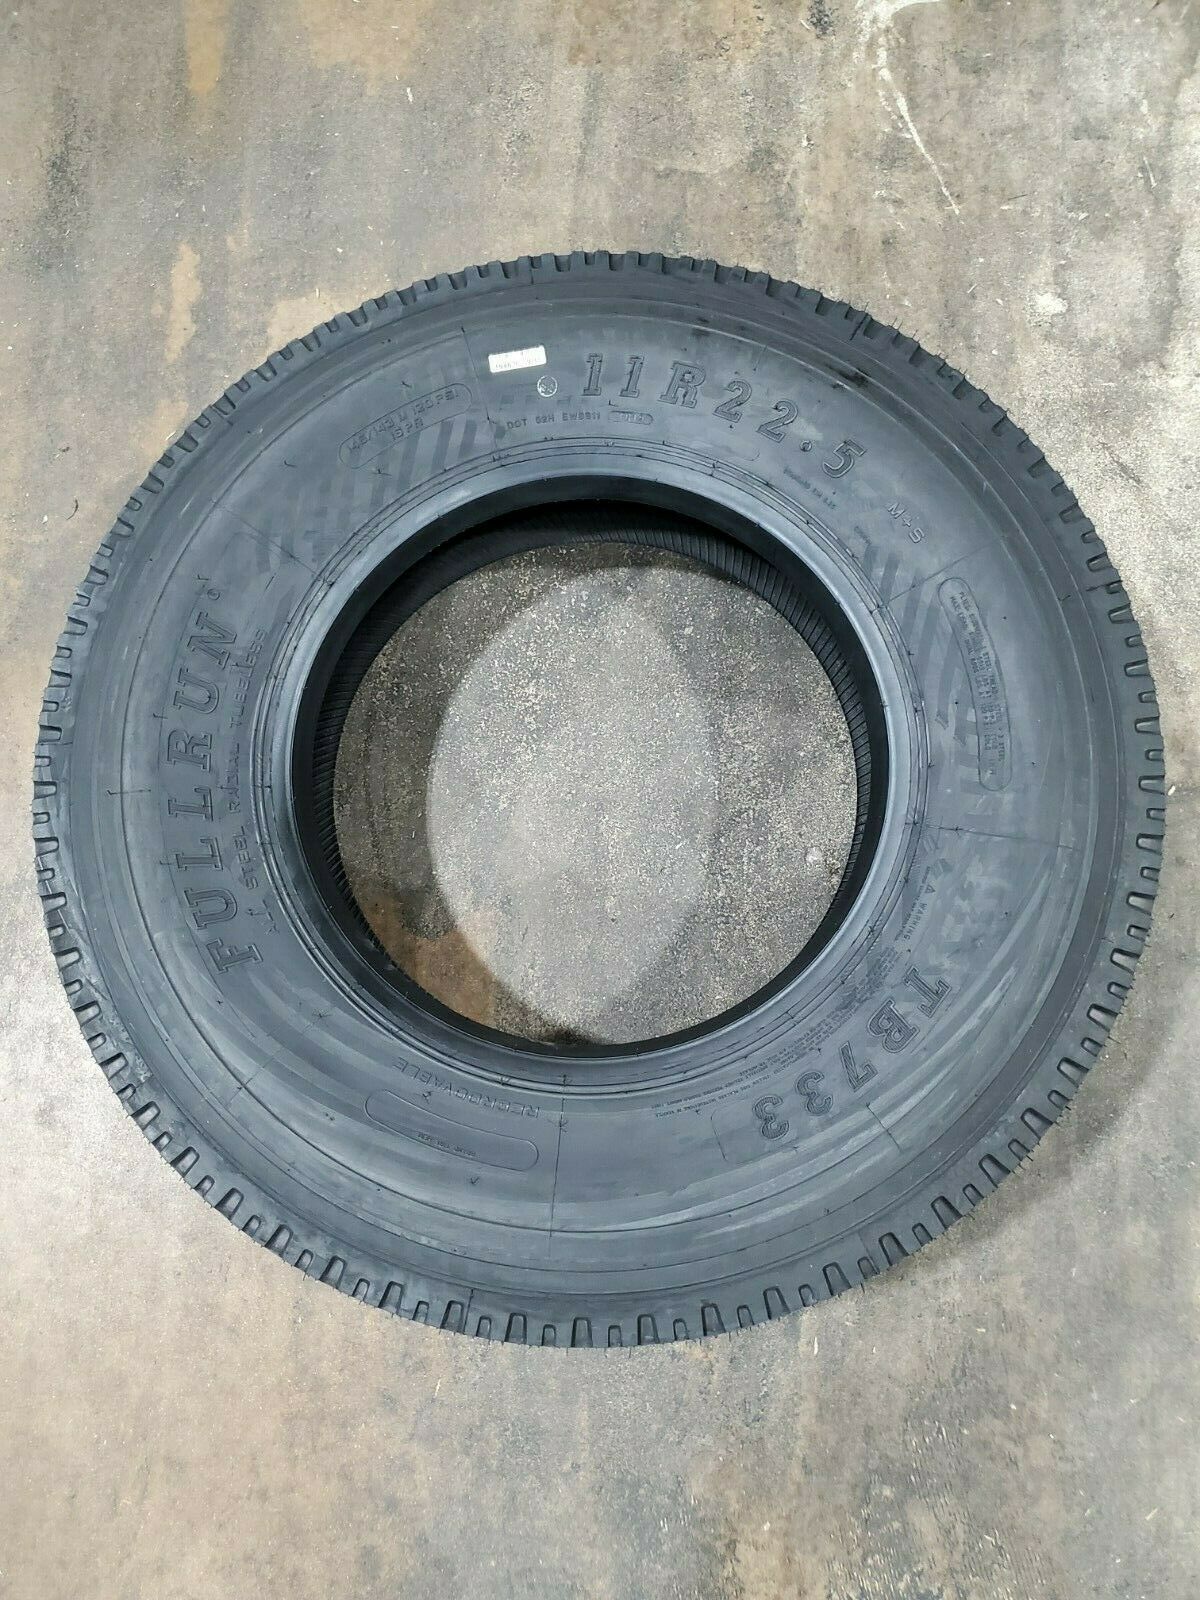 a black tire is sitting on a concrete surface .